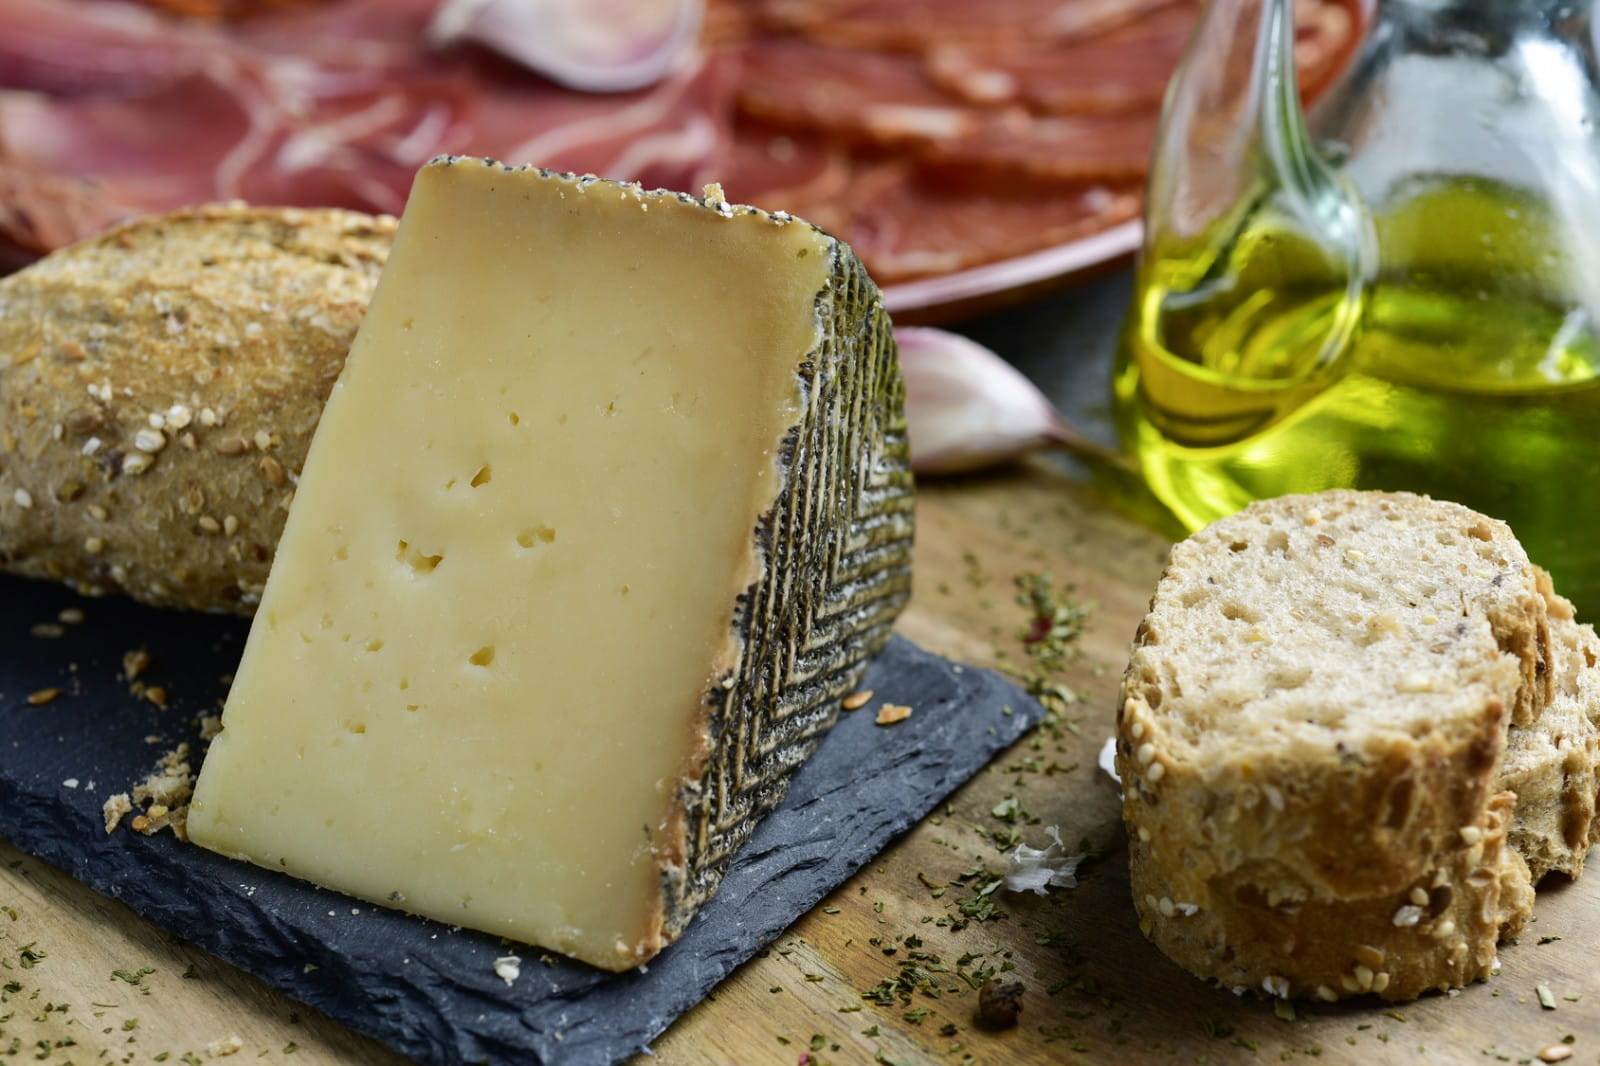 The best wine matches for Manchego, Berkswell and other hard sheep cheeses